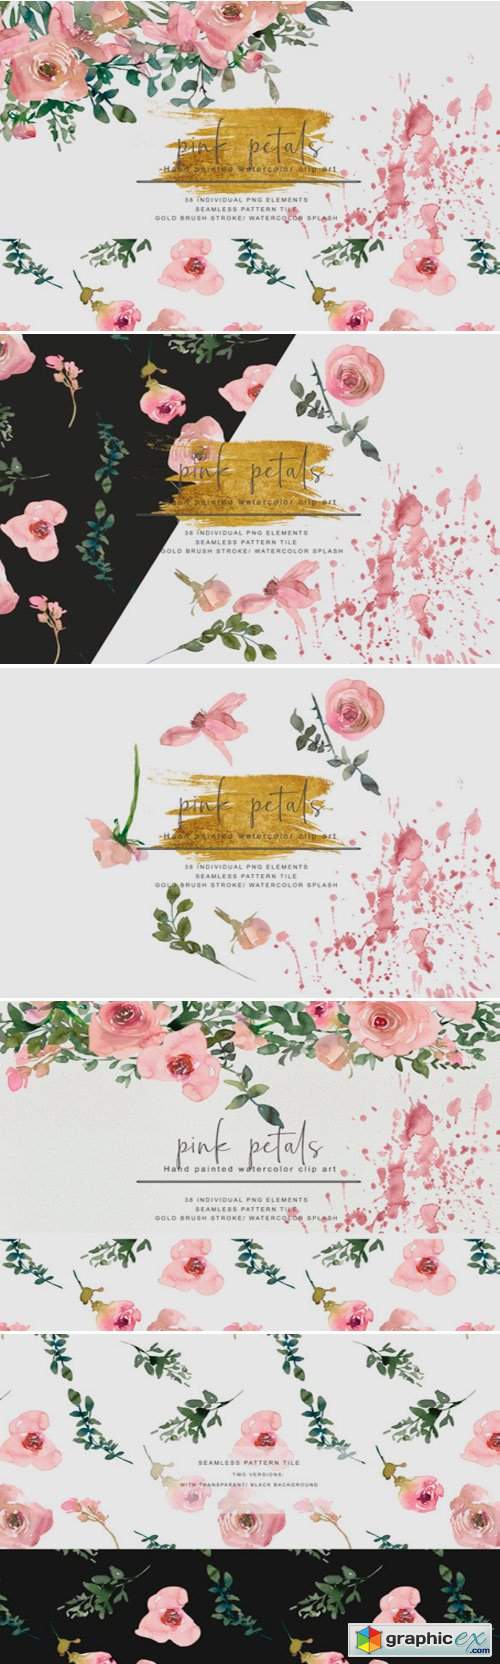 Hand Painted Watercolor Blush Pink Flowe